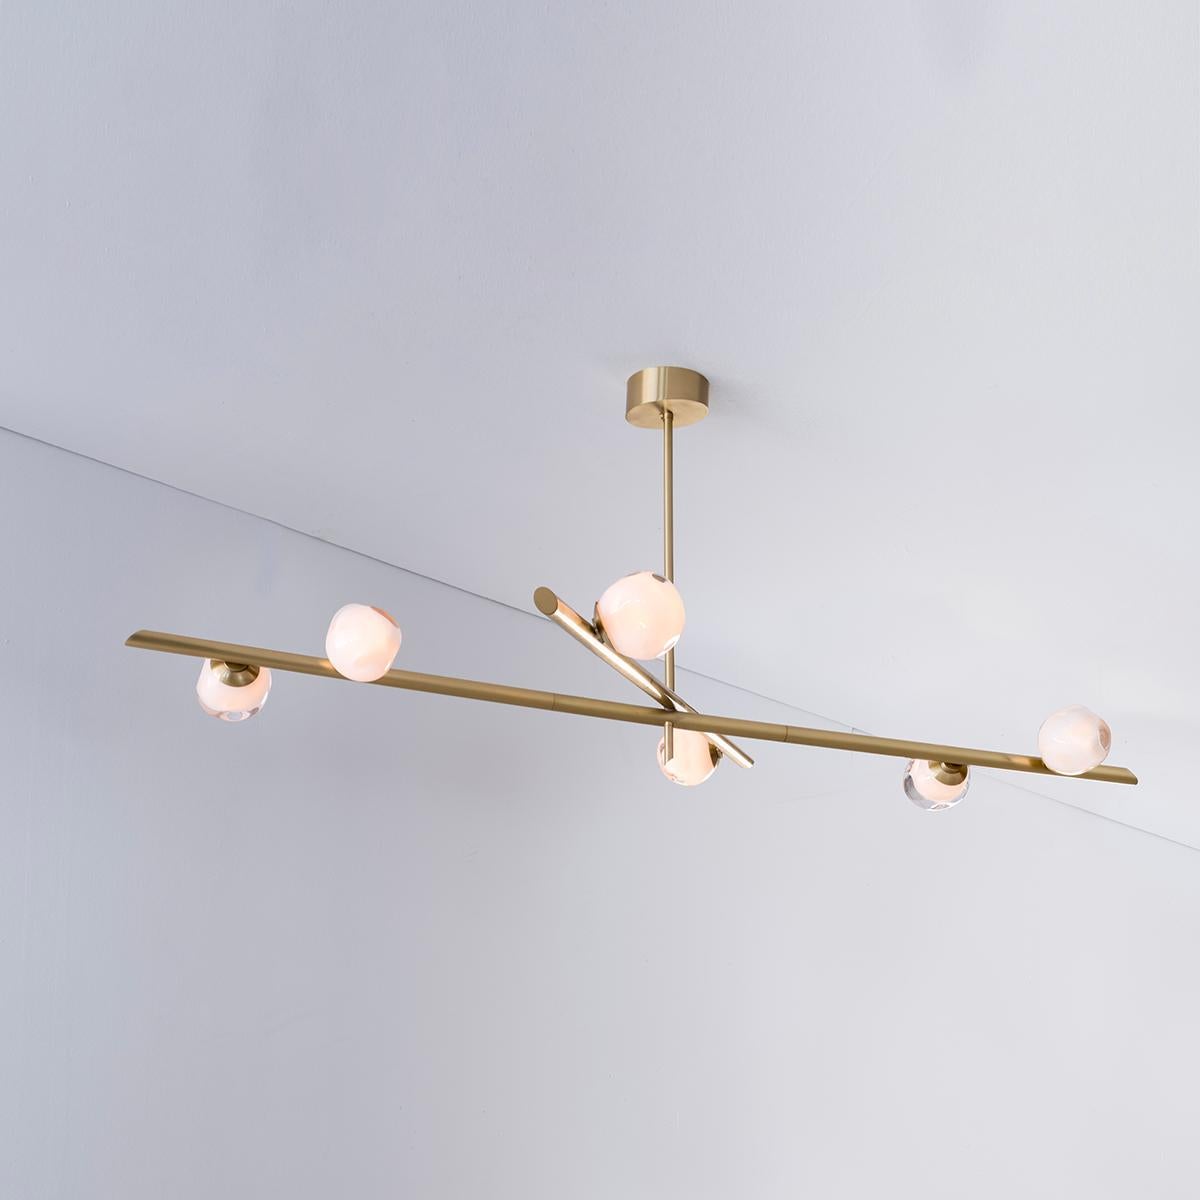 Antares Ceiling Light by Gaspare Asaro-Polished Brass Finish In New Condition For Sale In New York, NY